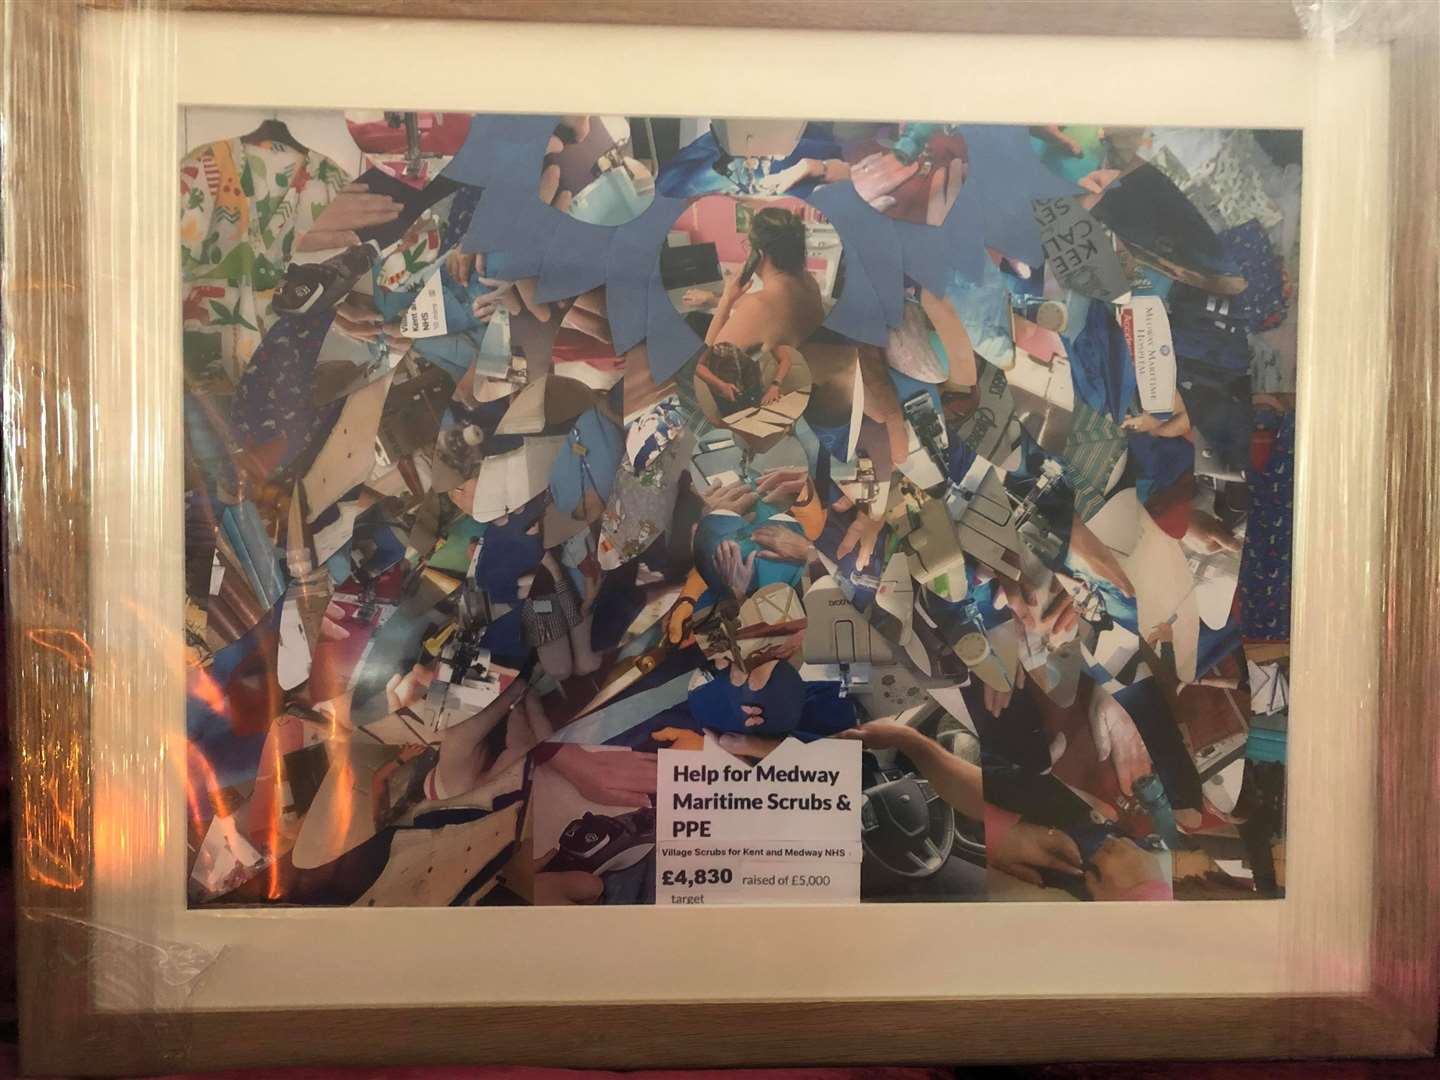 The collage made by Wendy Hansford has been donated to Medway Maritime Hospital